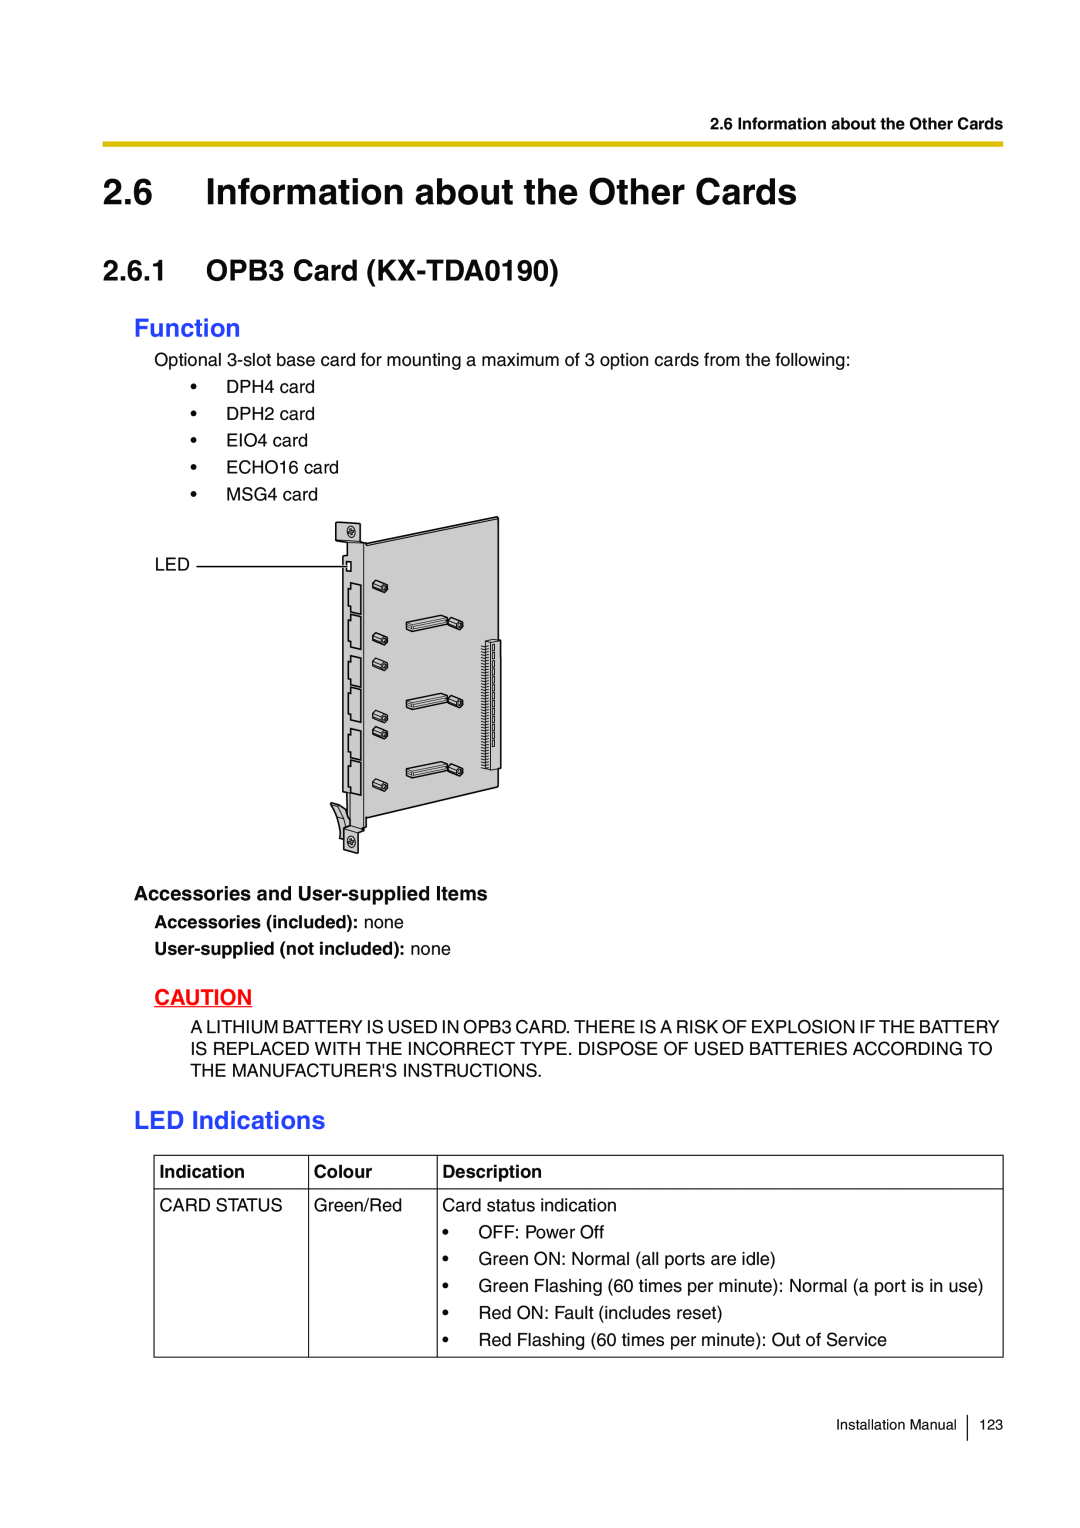 Panasonic KX-TDA100 Information about the Other Cards, 2.6.1 OPB3 Card KX-TDA0190, Function, LED Indications, Colour 